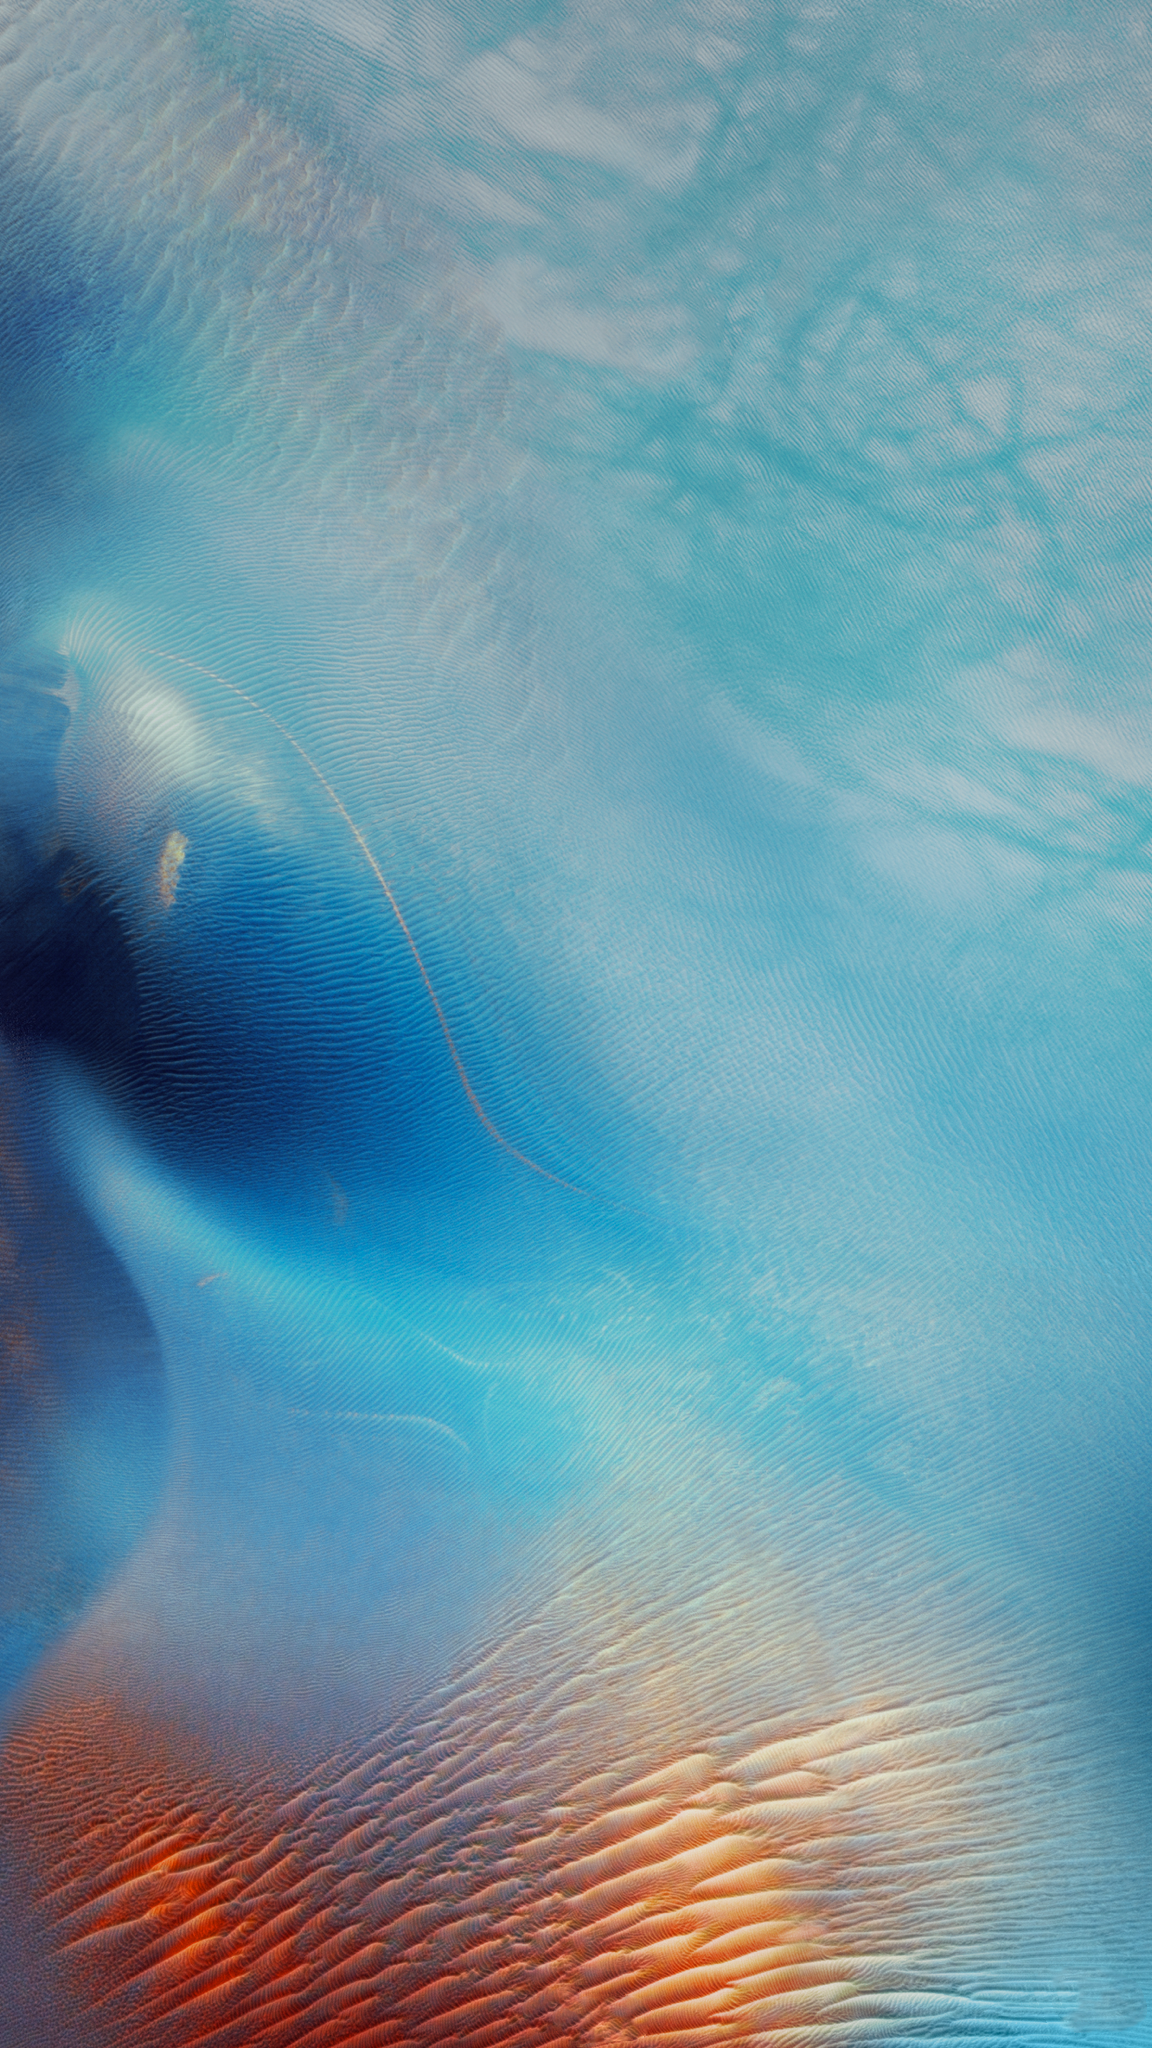 Get the 15 New Default iOS 9 Wallpapers for iPhone